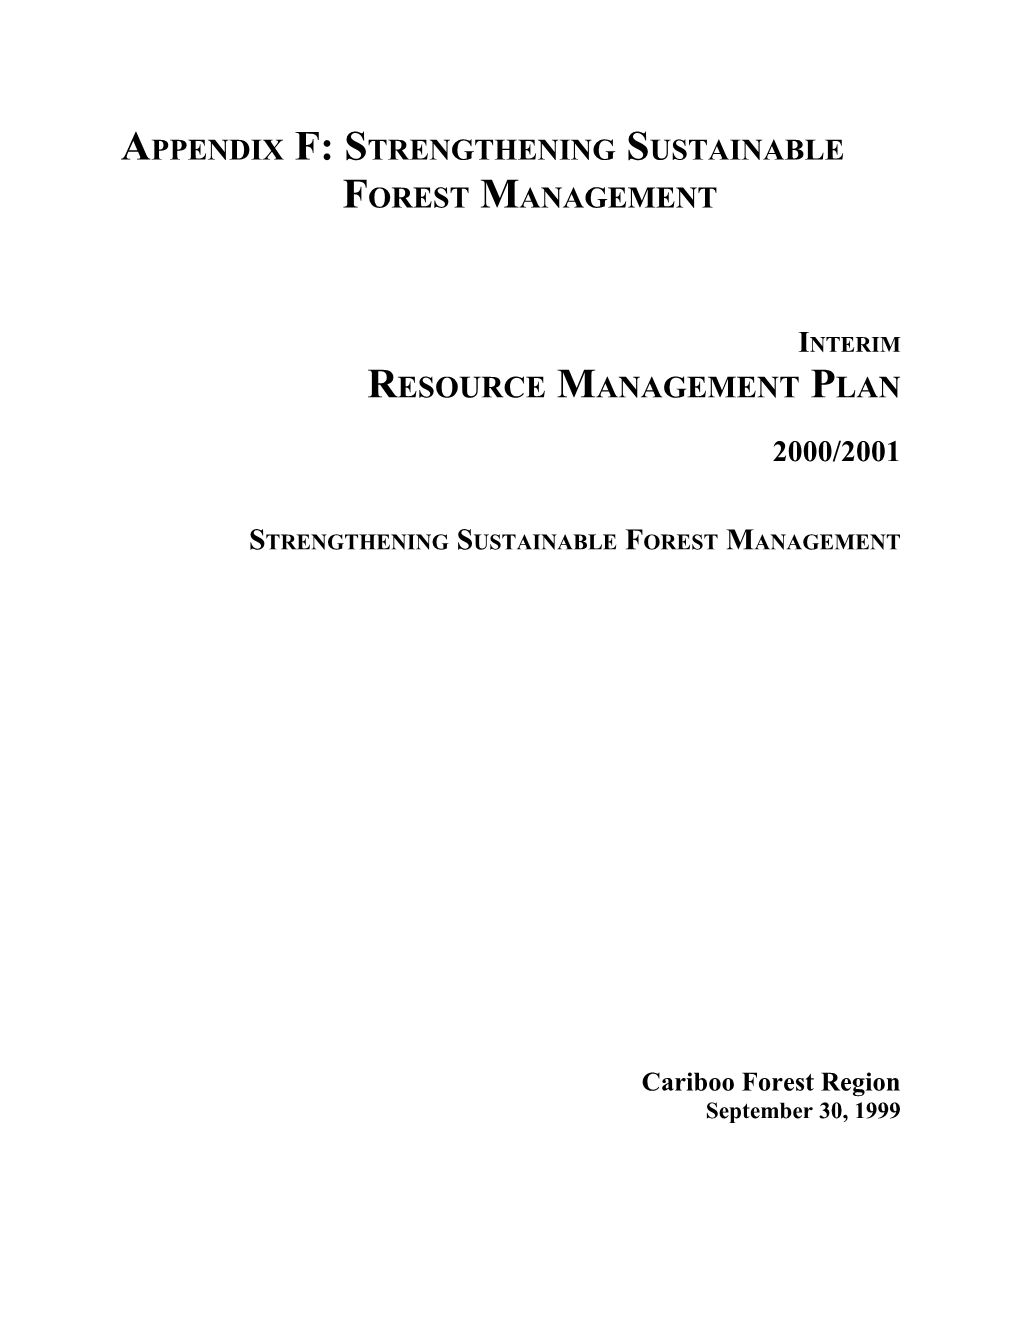 Strengthening Sustainable Forest Management